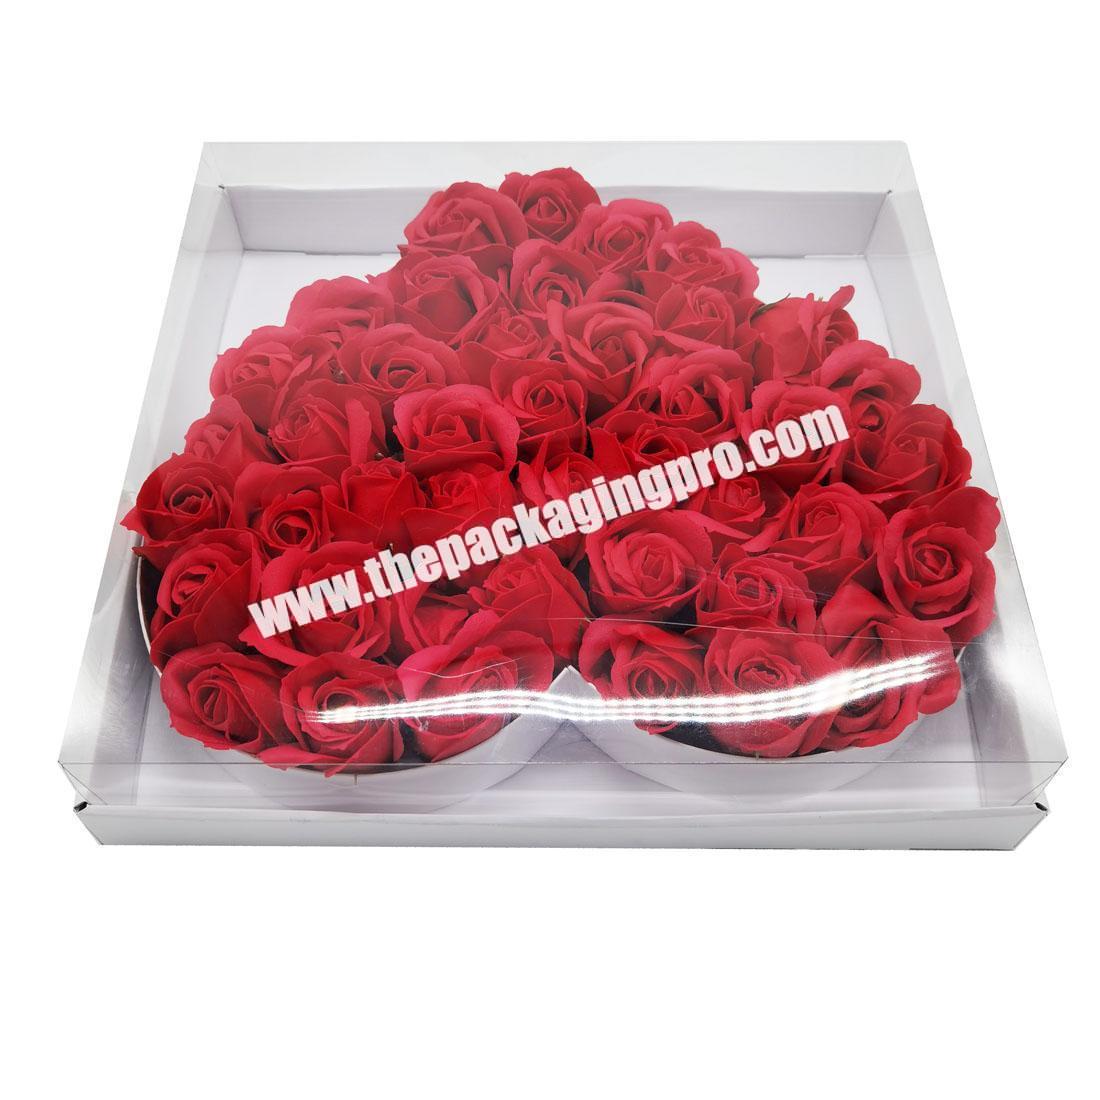 White Cardboard Sweets Gift Cardboard Flower Floral Packaging Heart Shaped Box With Cover